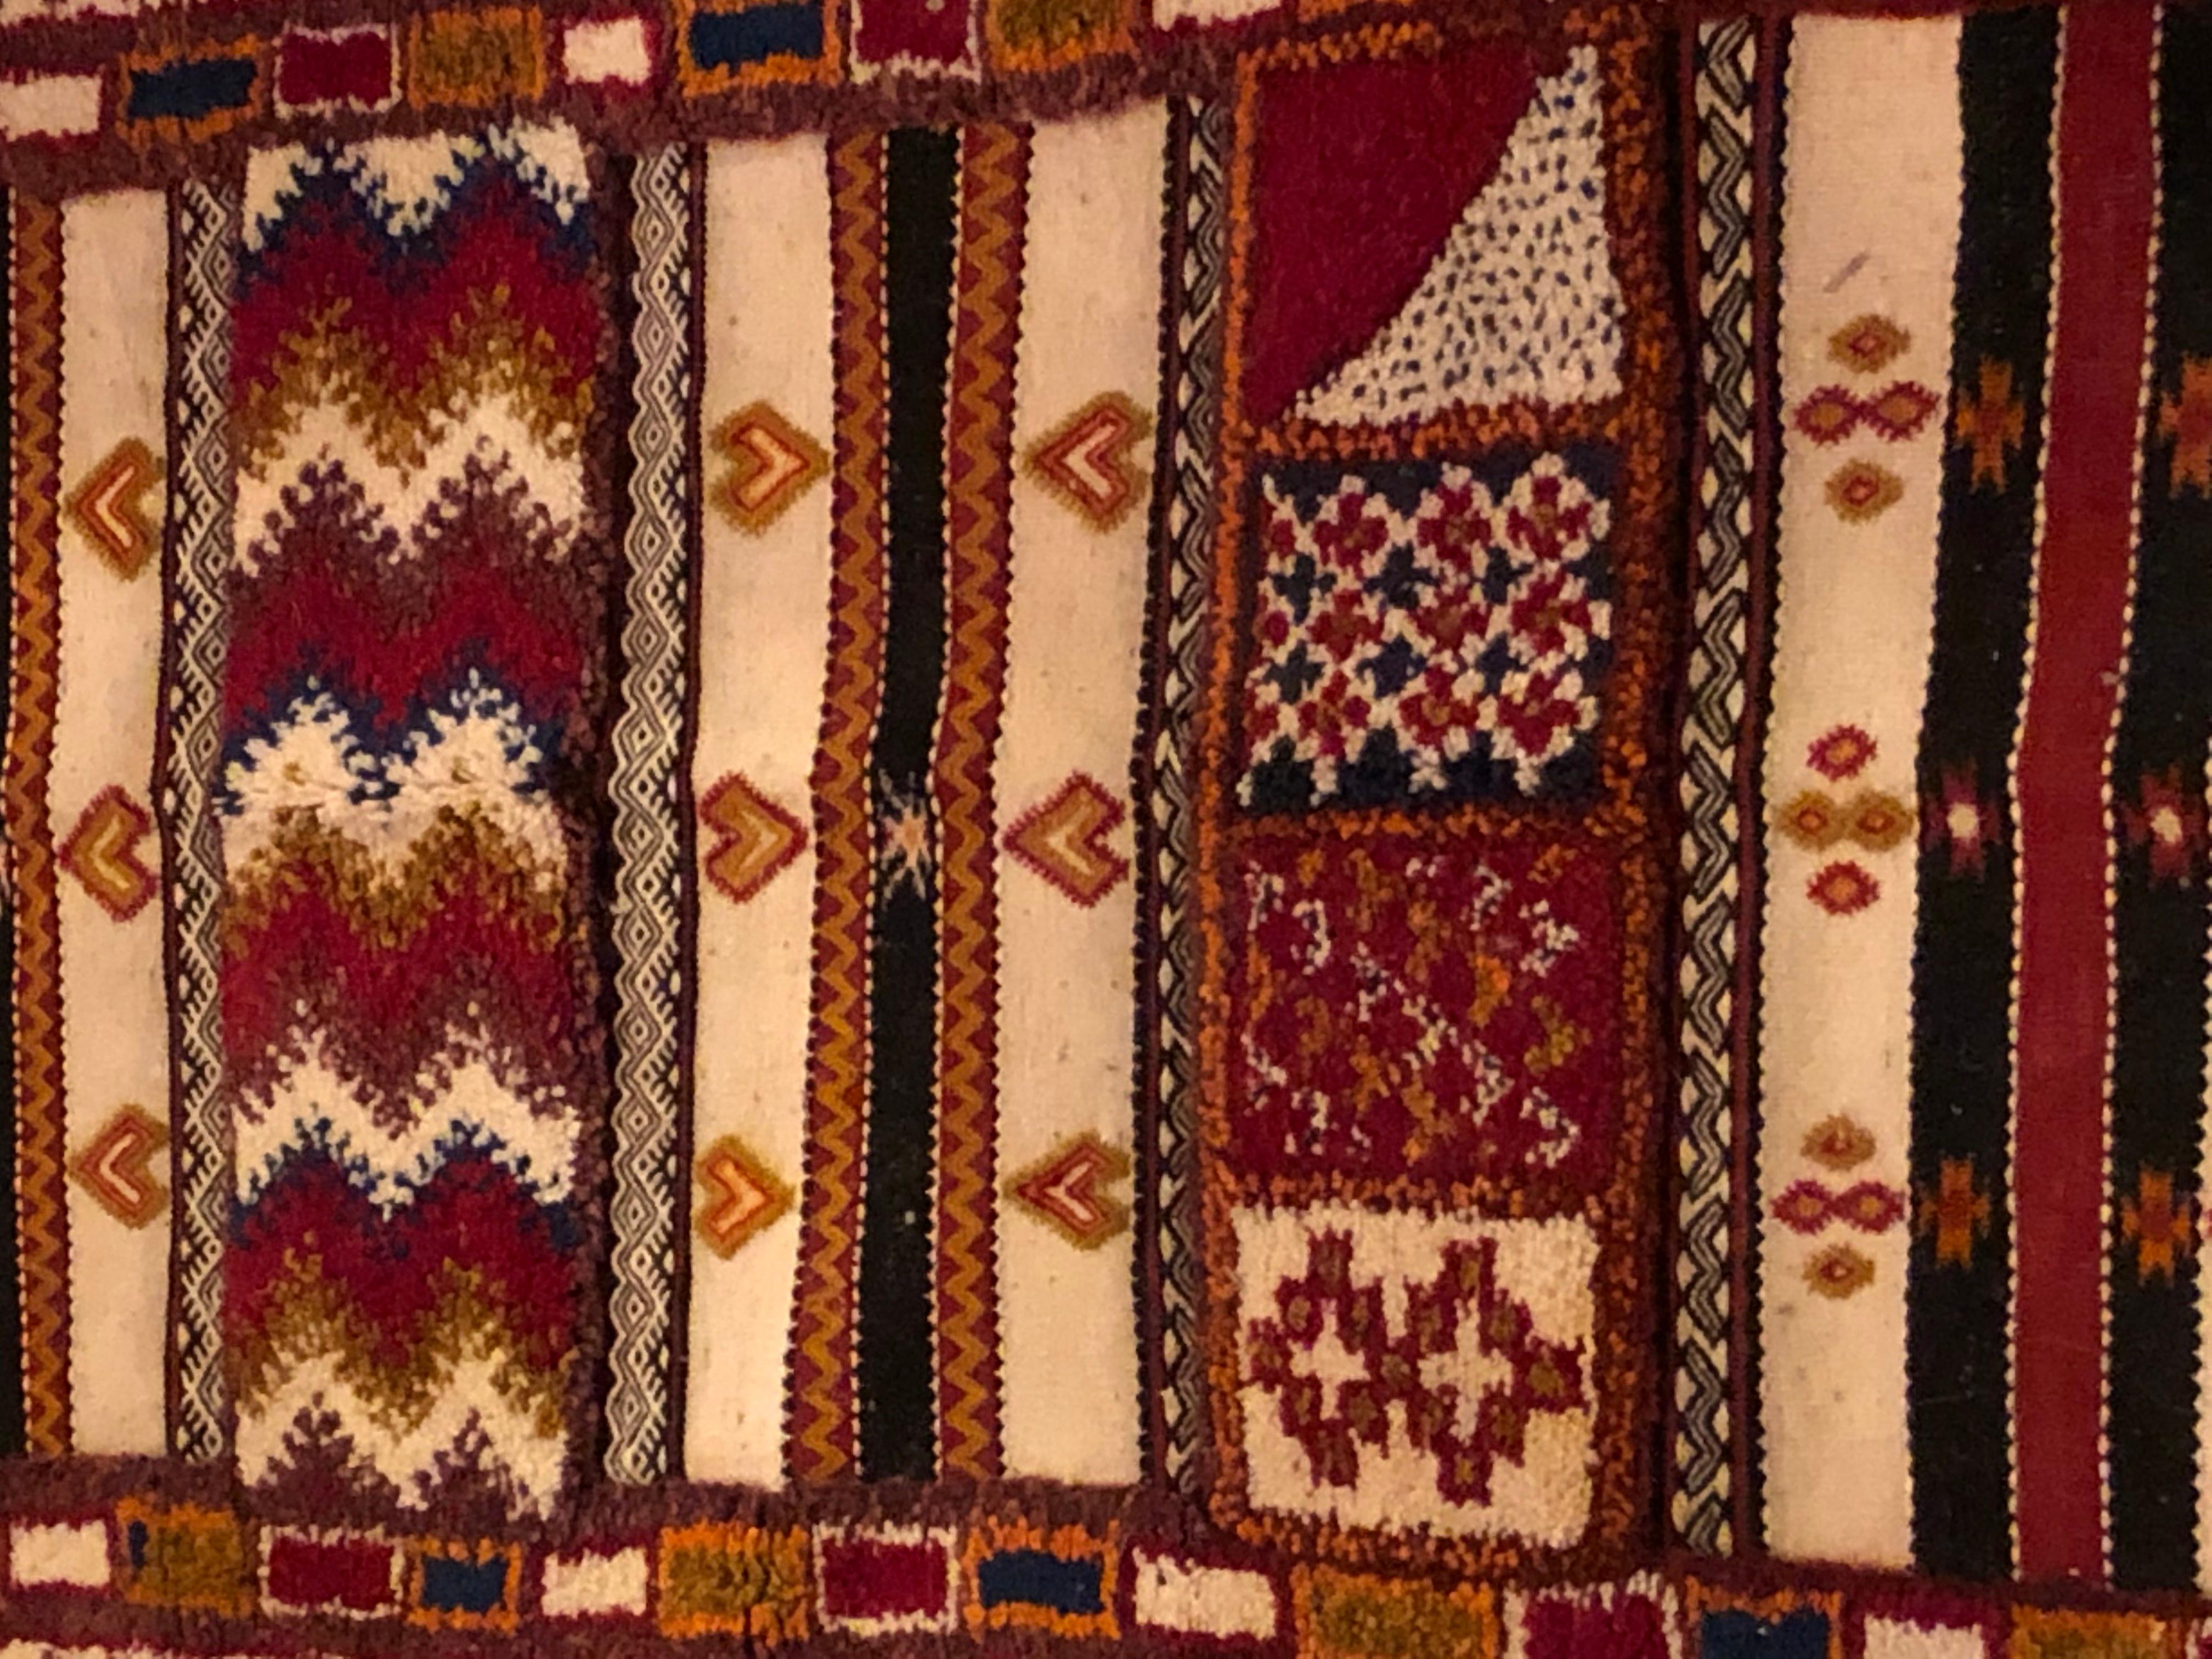 Hand-Woven Moroccan Rug or Carpet with Tribal Design